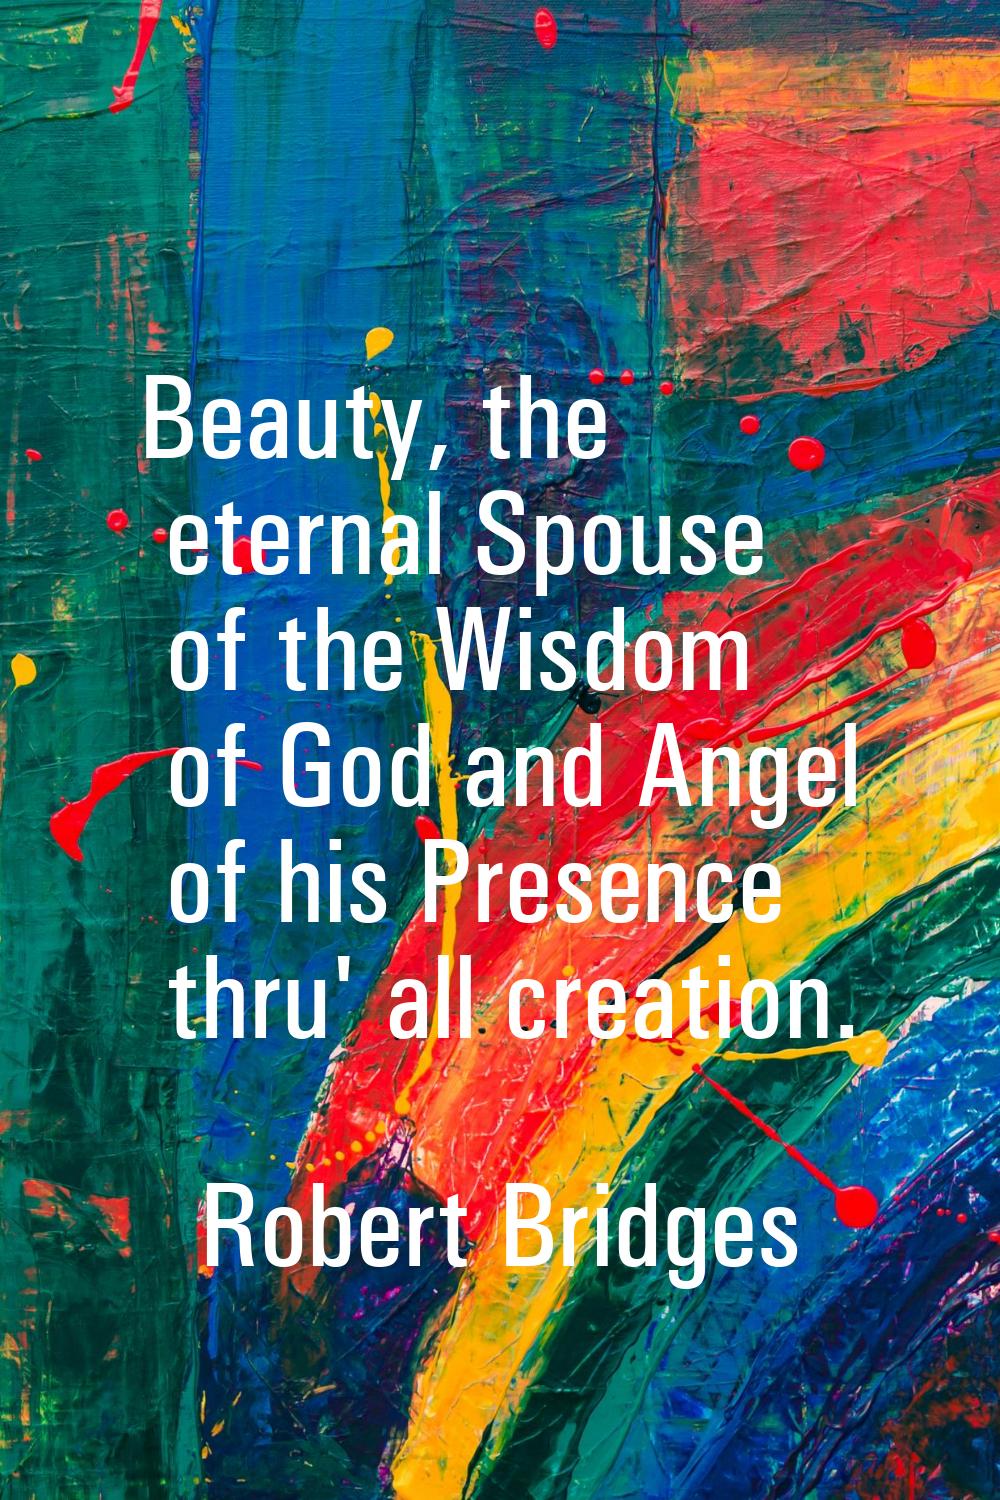 Beauty, the eternal Spouse of the Wisdom of God and Angel of his Presence thru' all creation.